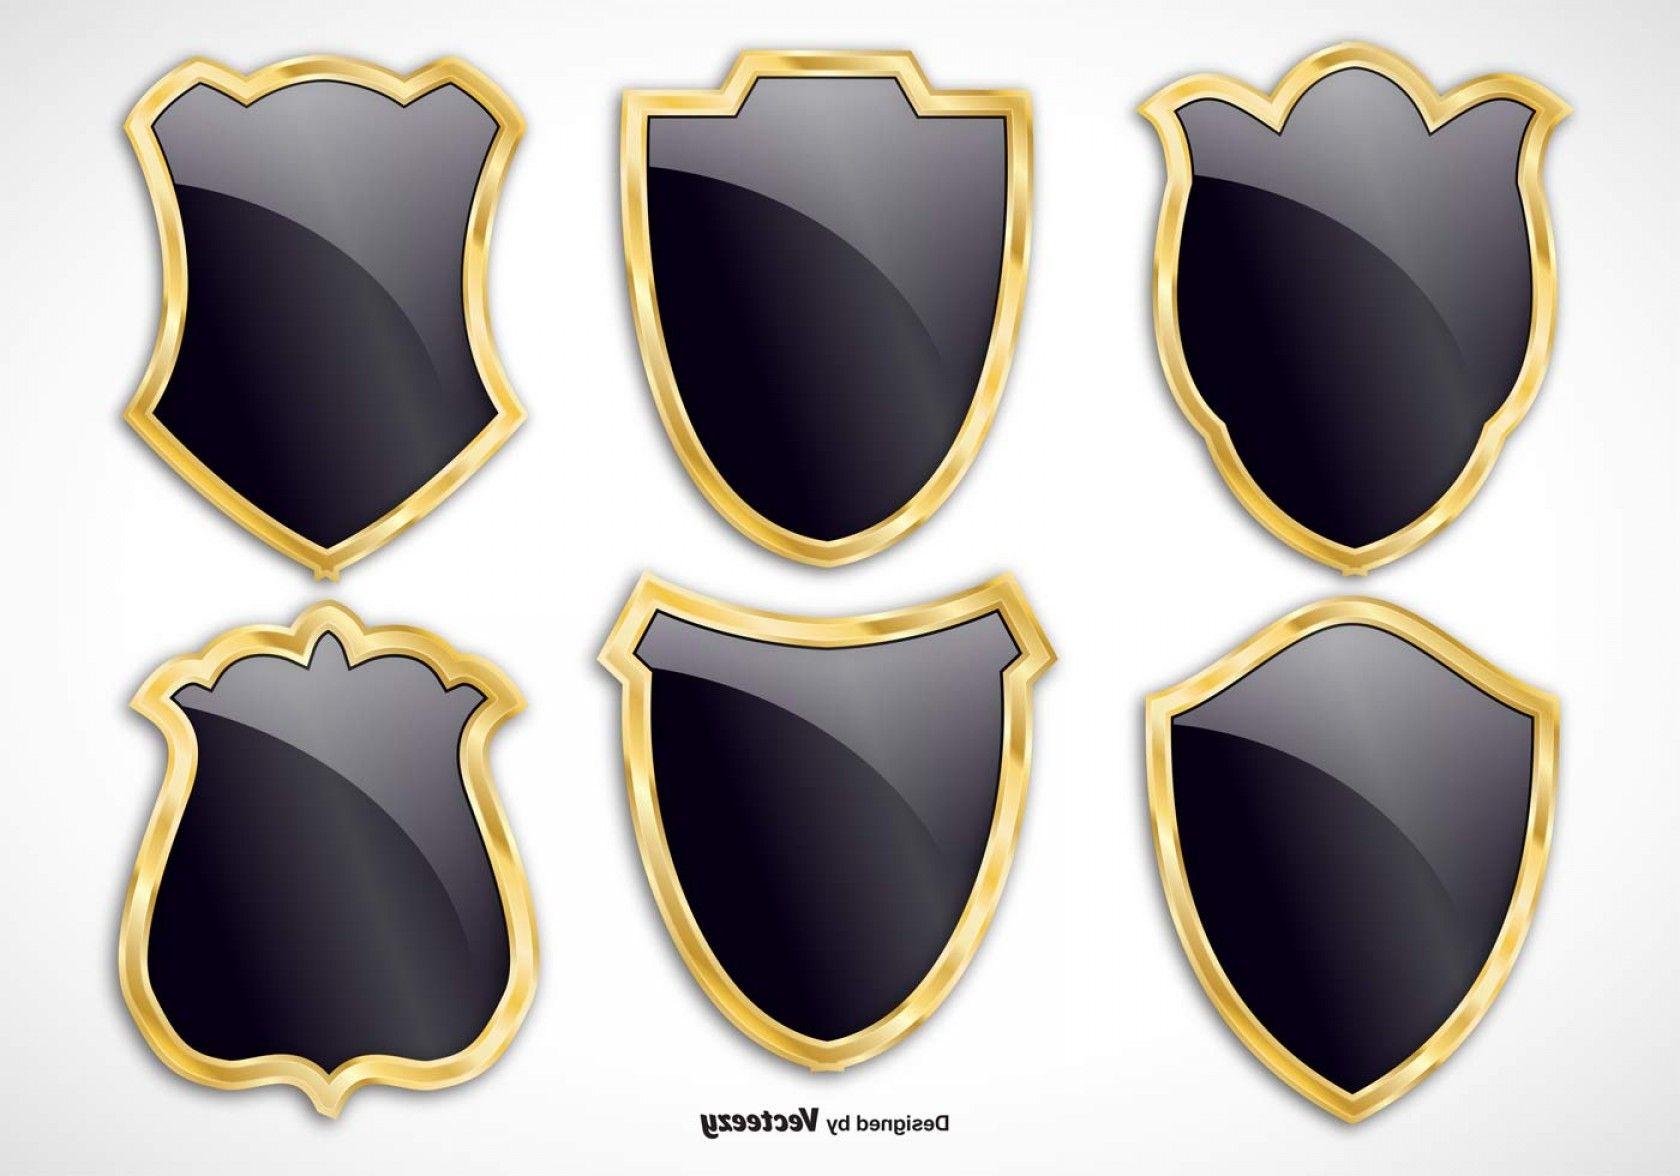 Black and Gold Shield Logo - Blue And Gold Shield Vector | SOIDERGI